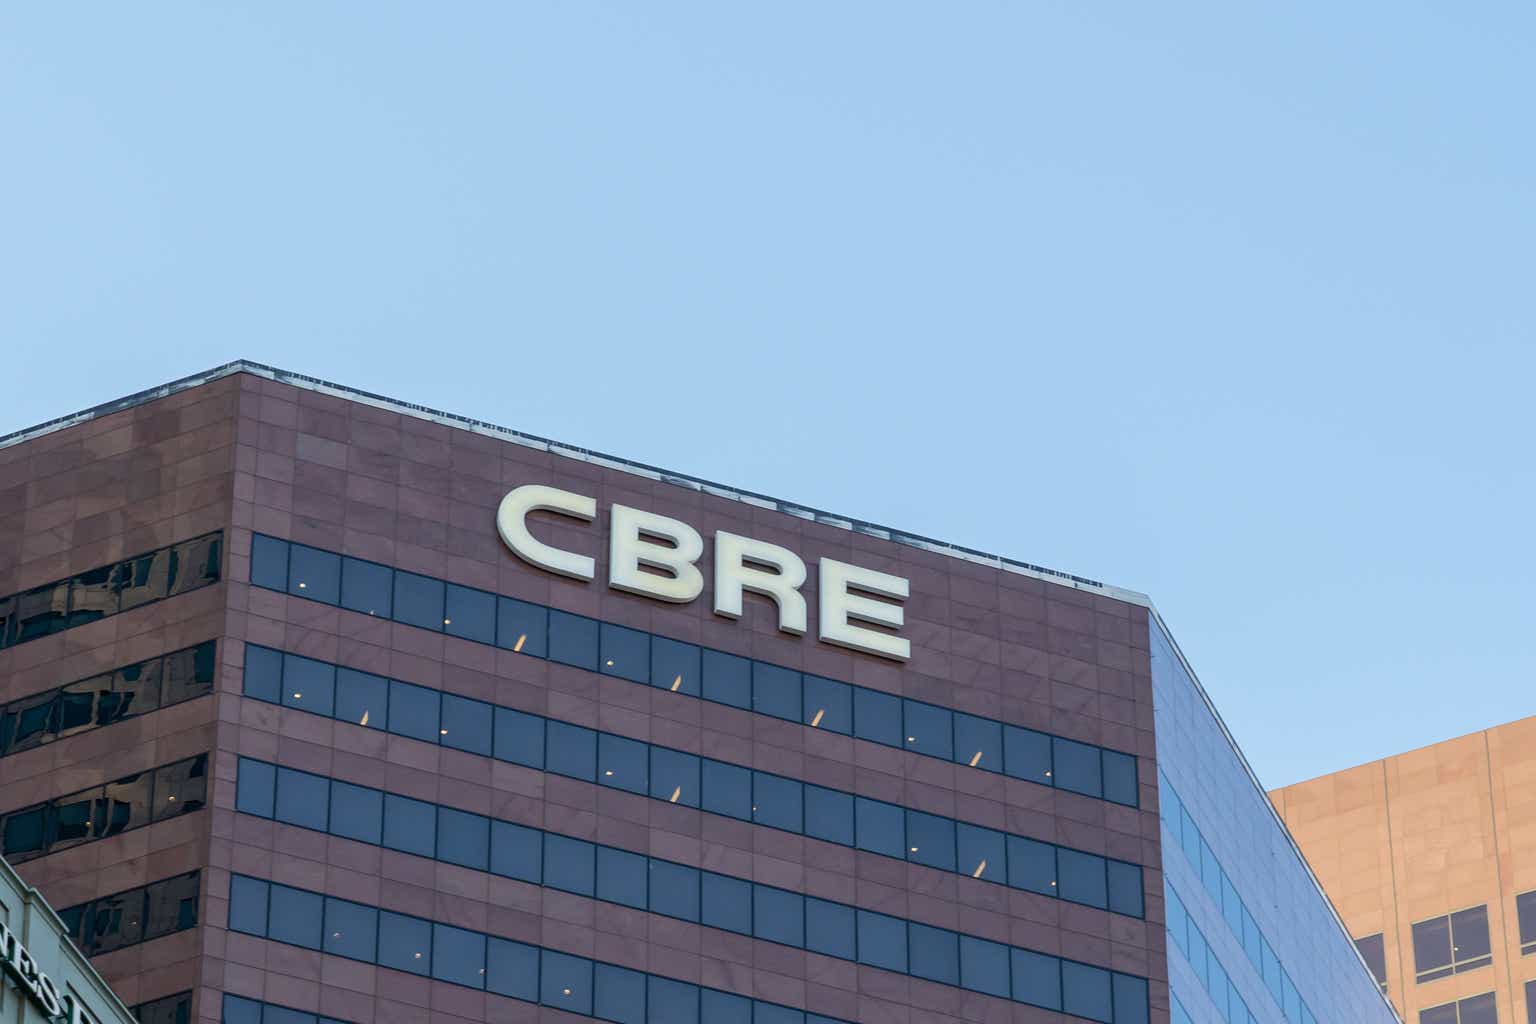 CBRE Group: Watch Recent Investment And 2024 Guidance